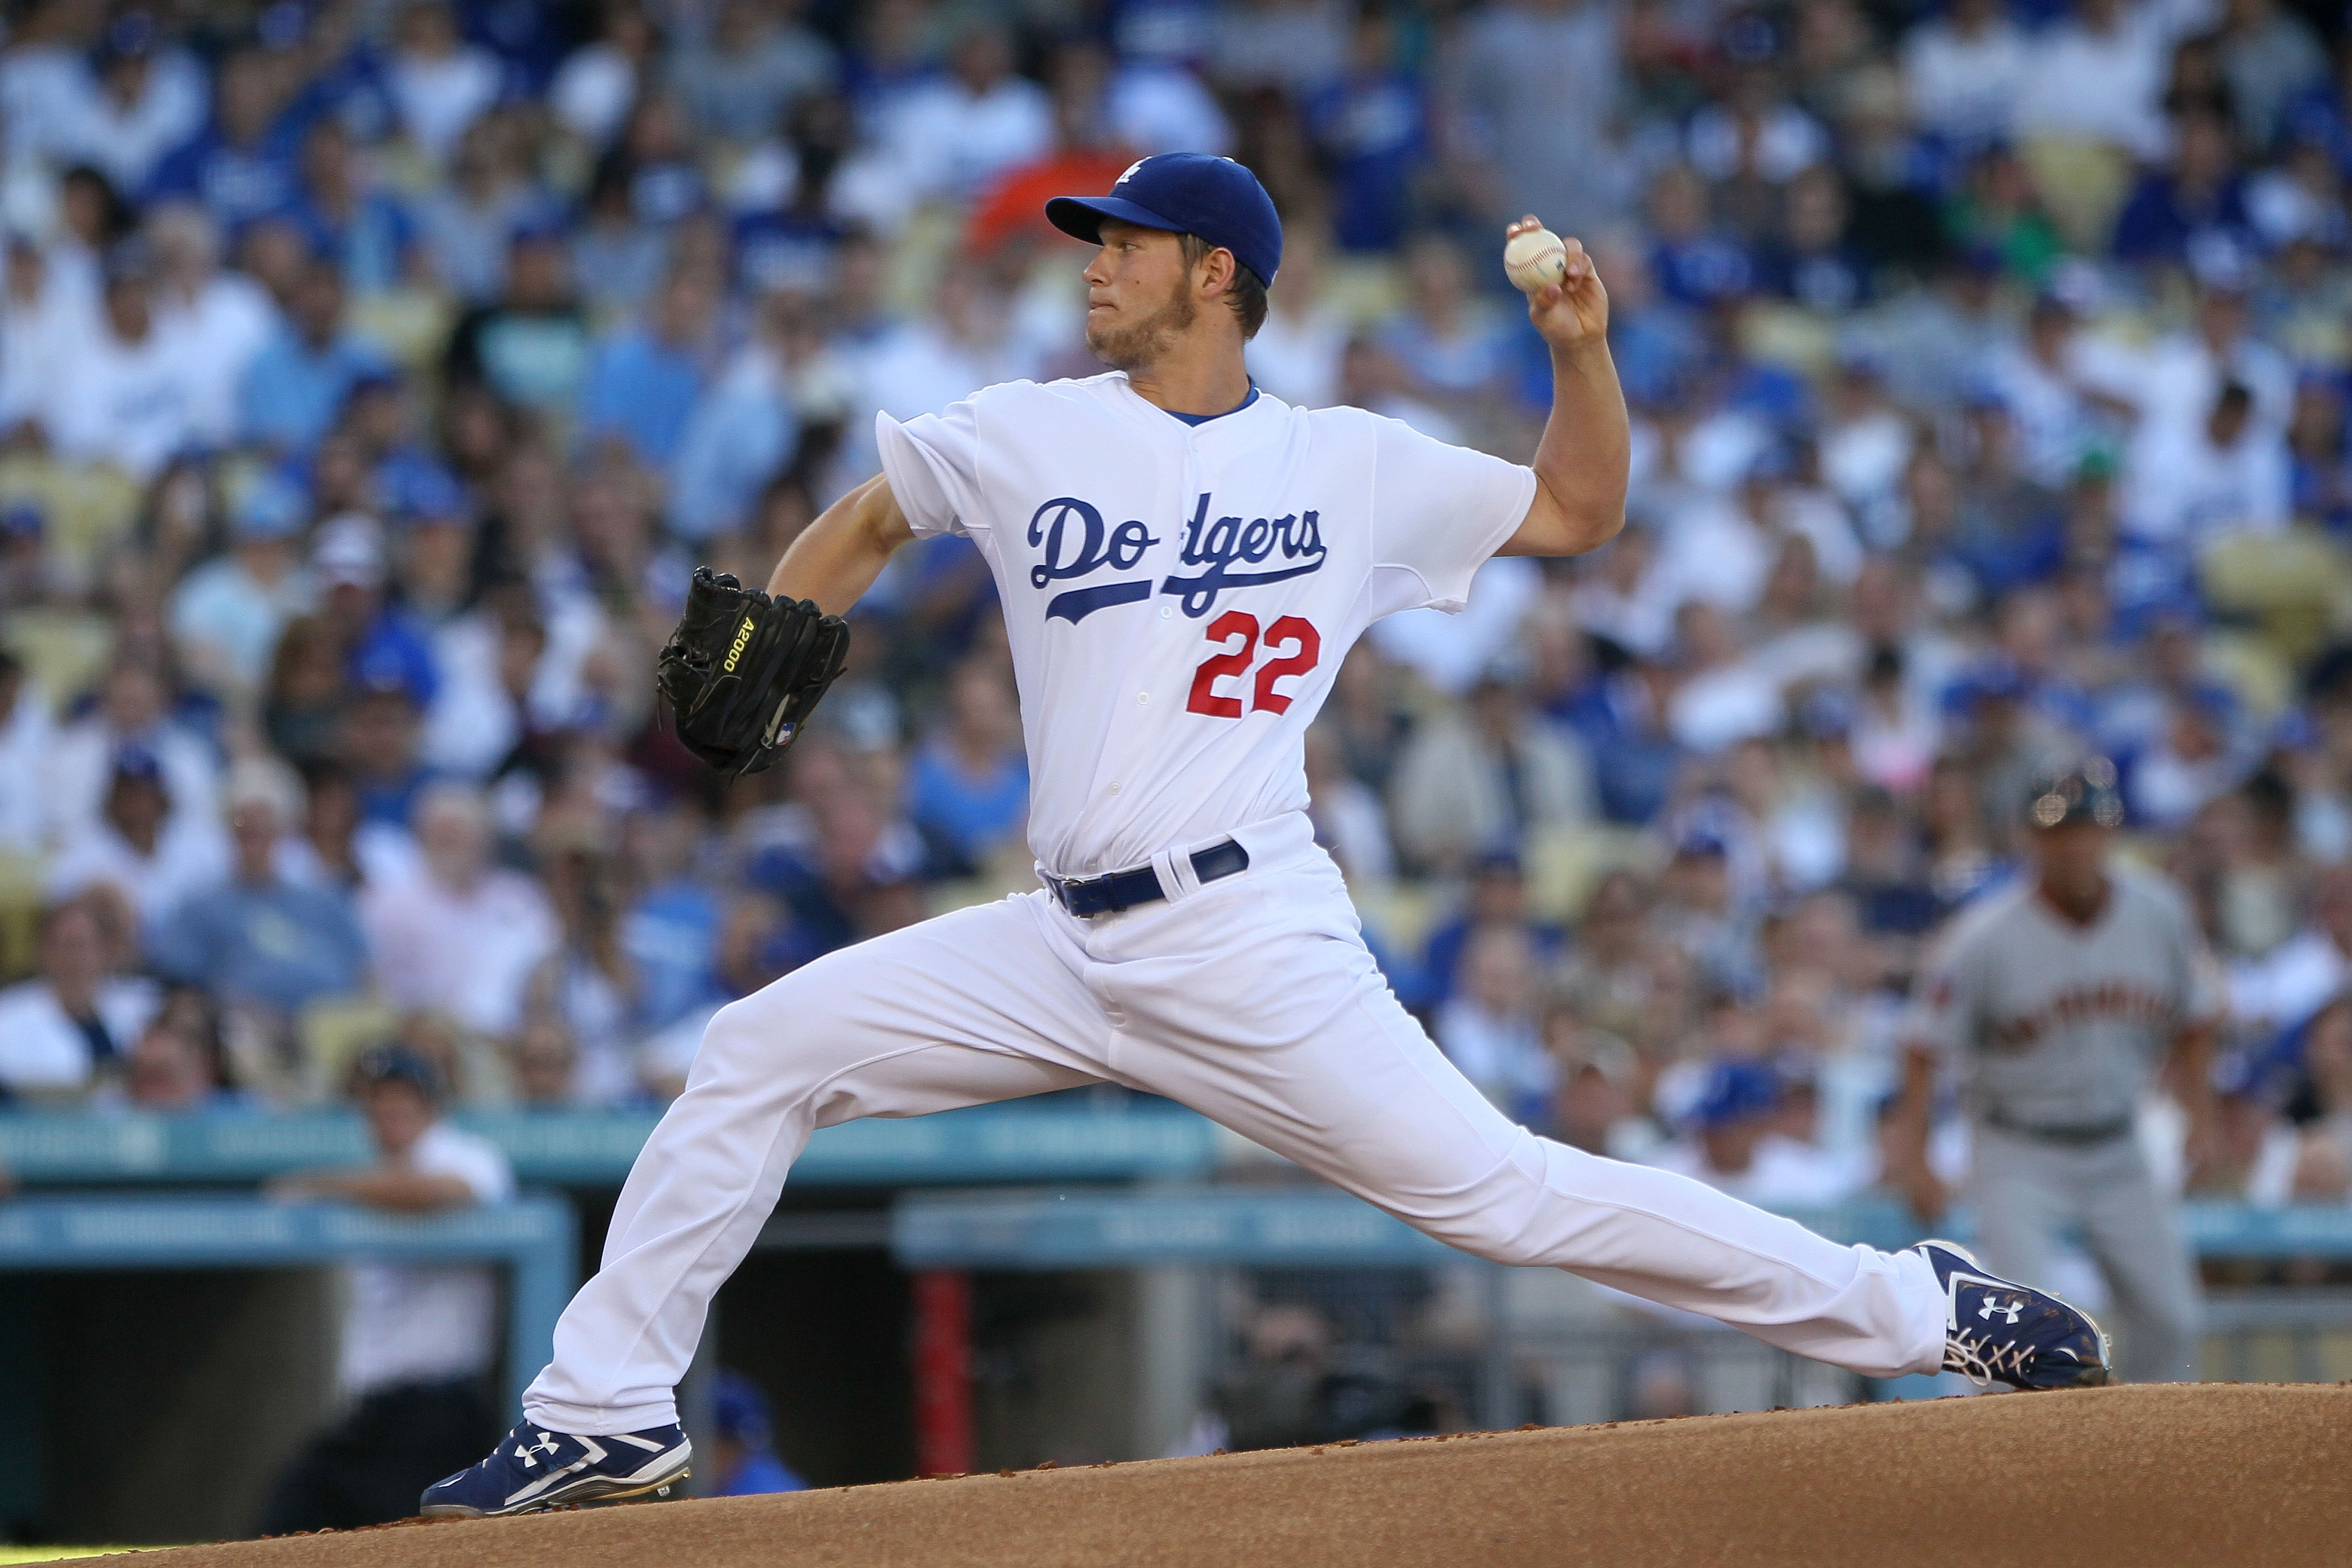 Dodgers' Kershaw pitches a win for the love of reading – Daily News